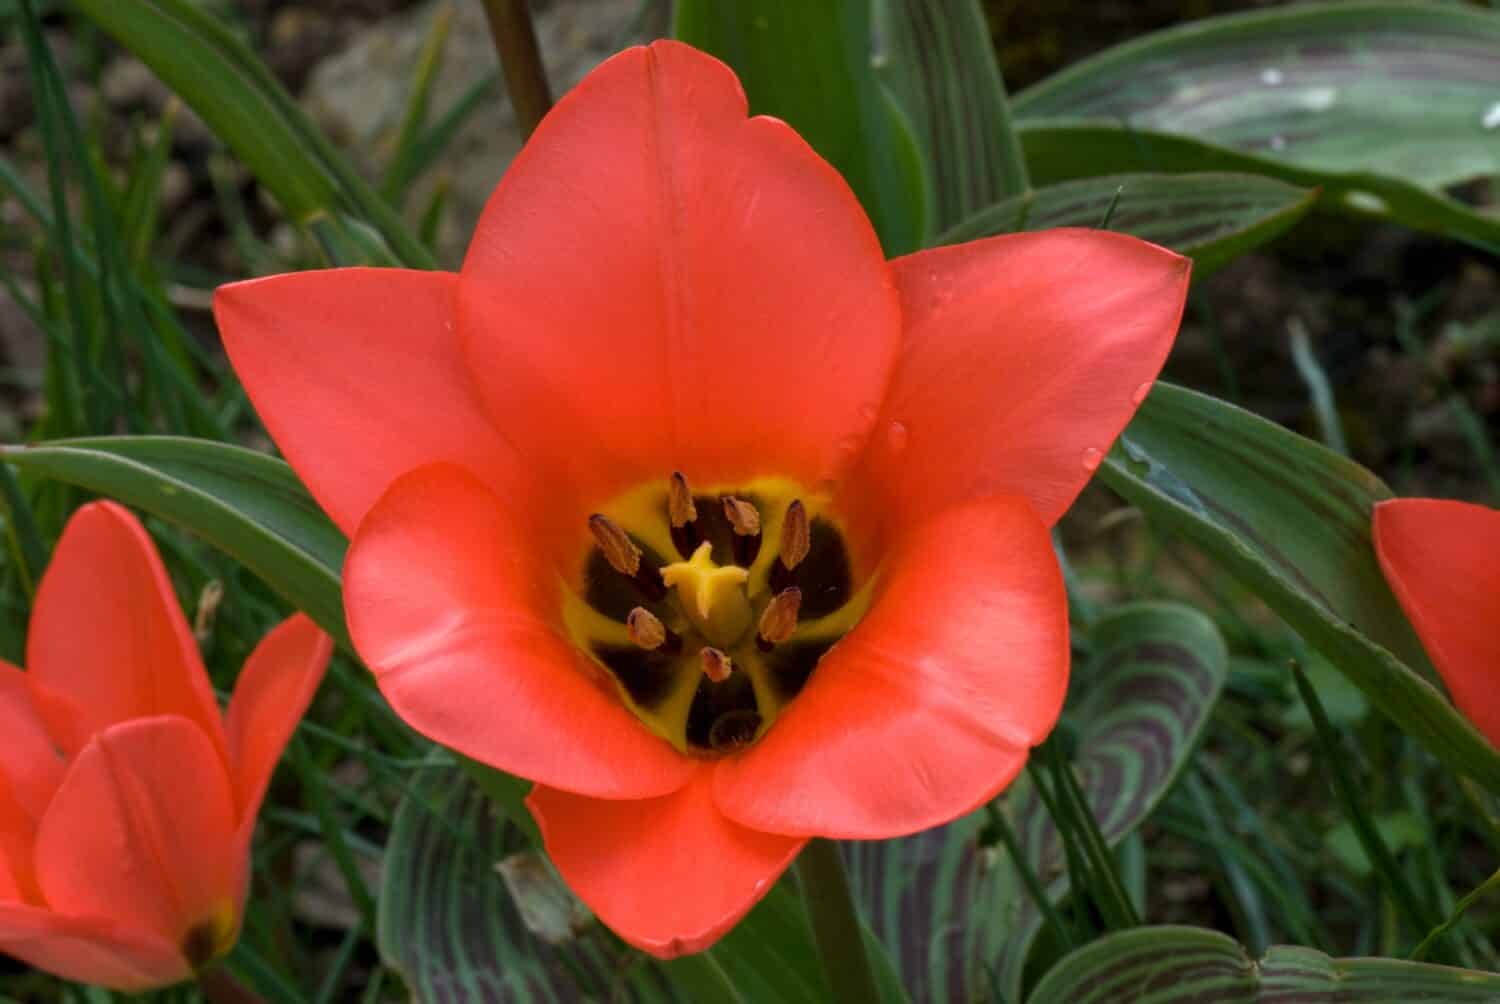 Tulipa 'Sweet Lady' is a Greigii Tulip (Div. 14) with red flowers